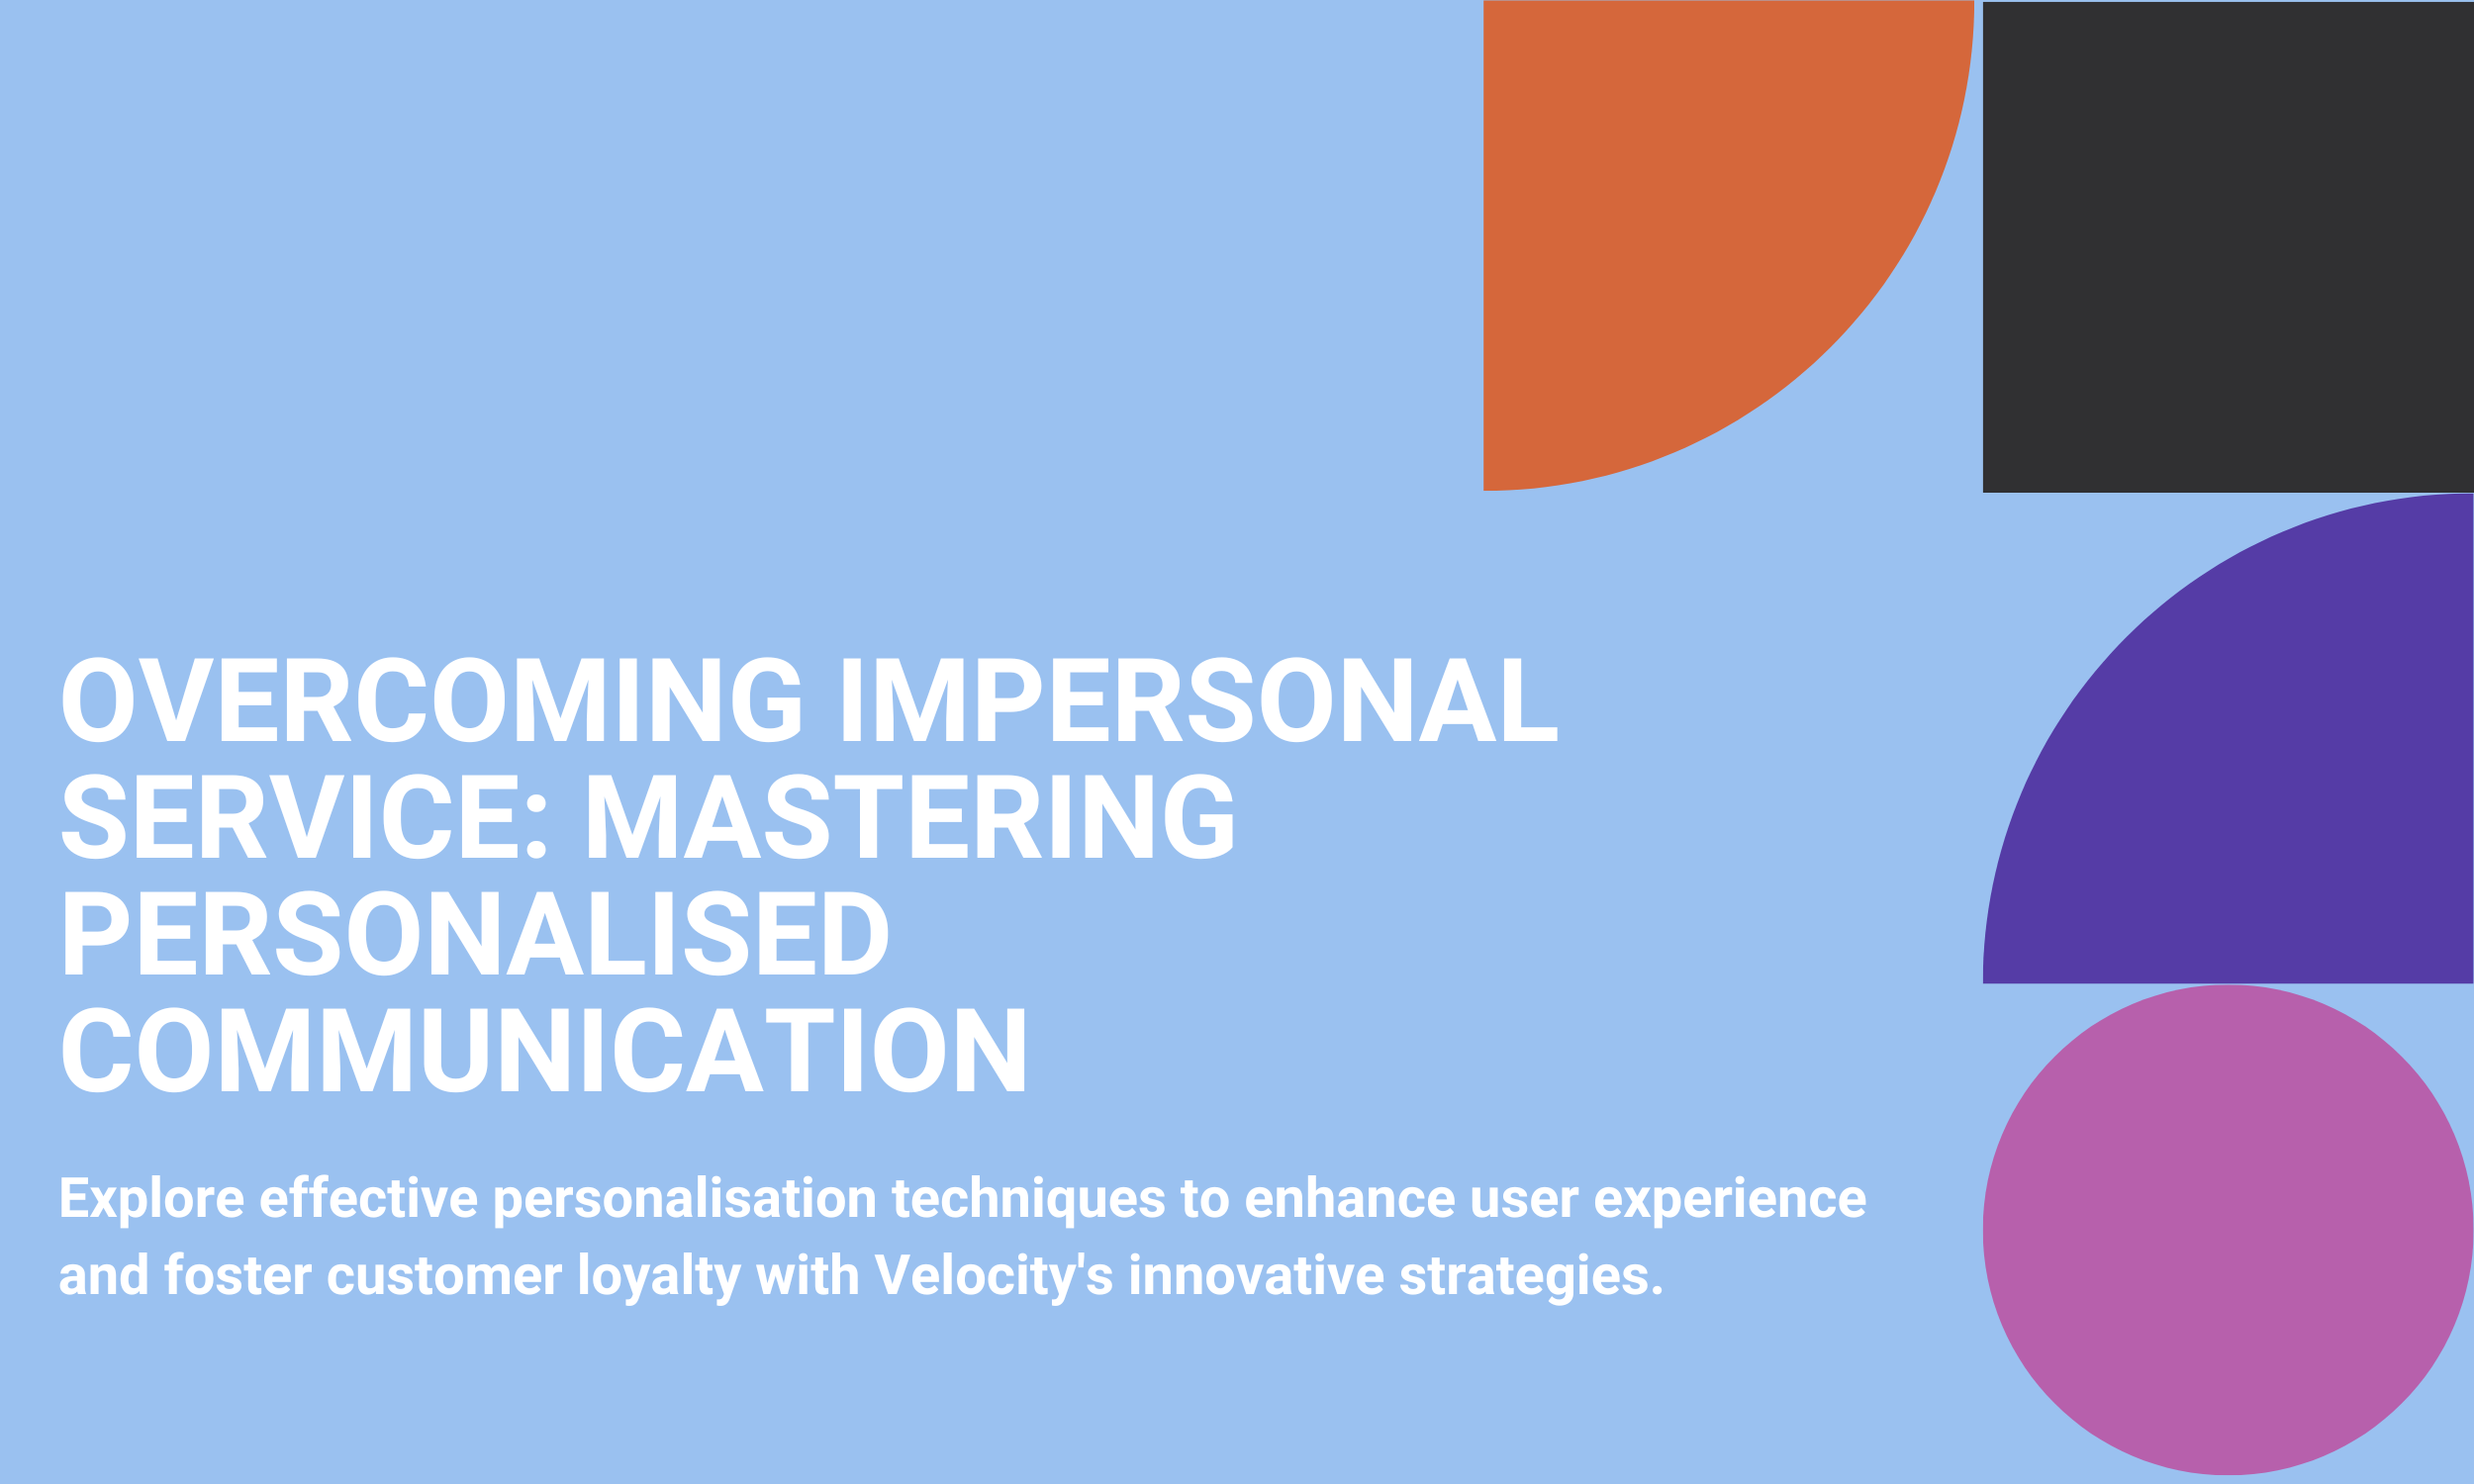 Overcoming Impersonal Service: Mastering Personalized Communication